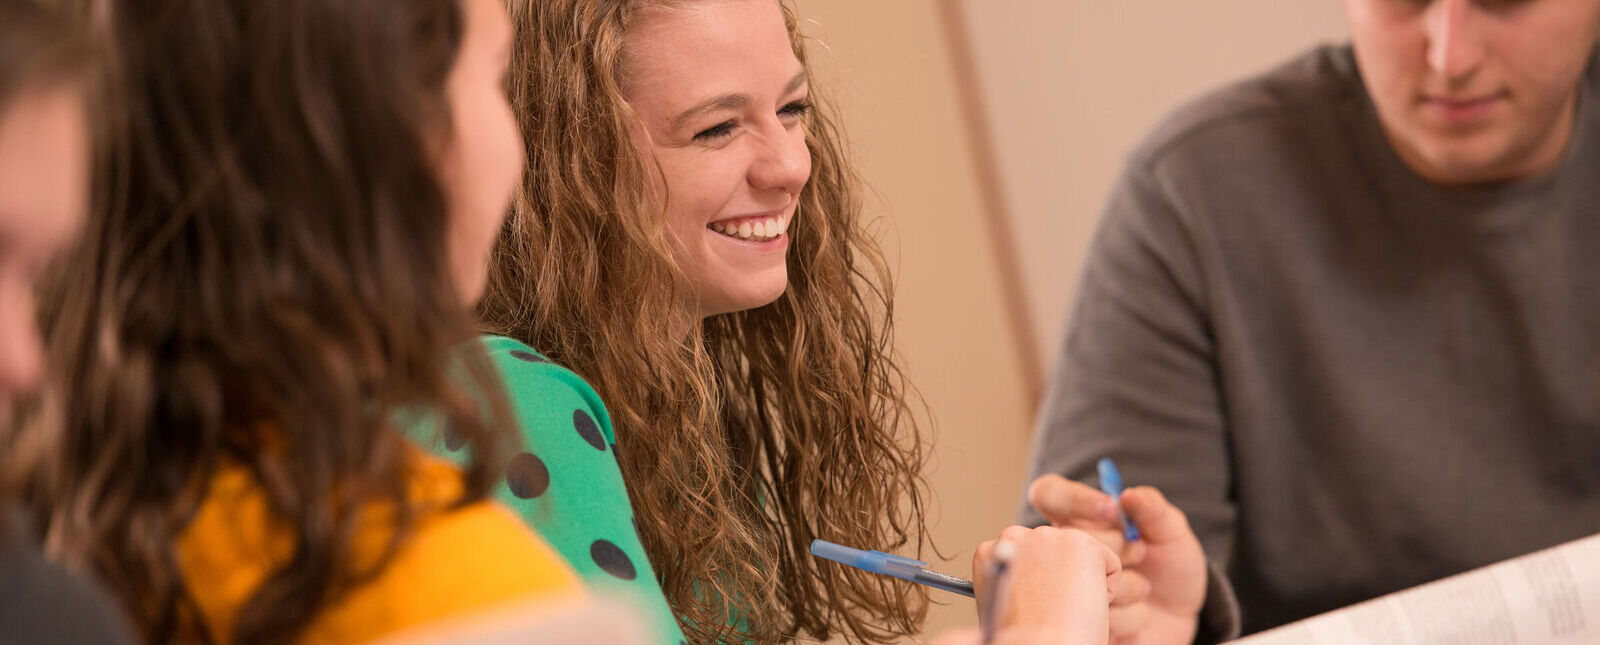 A female student smiles while working on a class assignment with a group